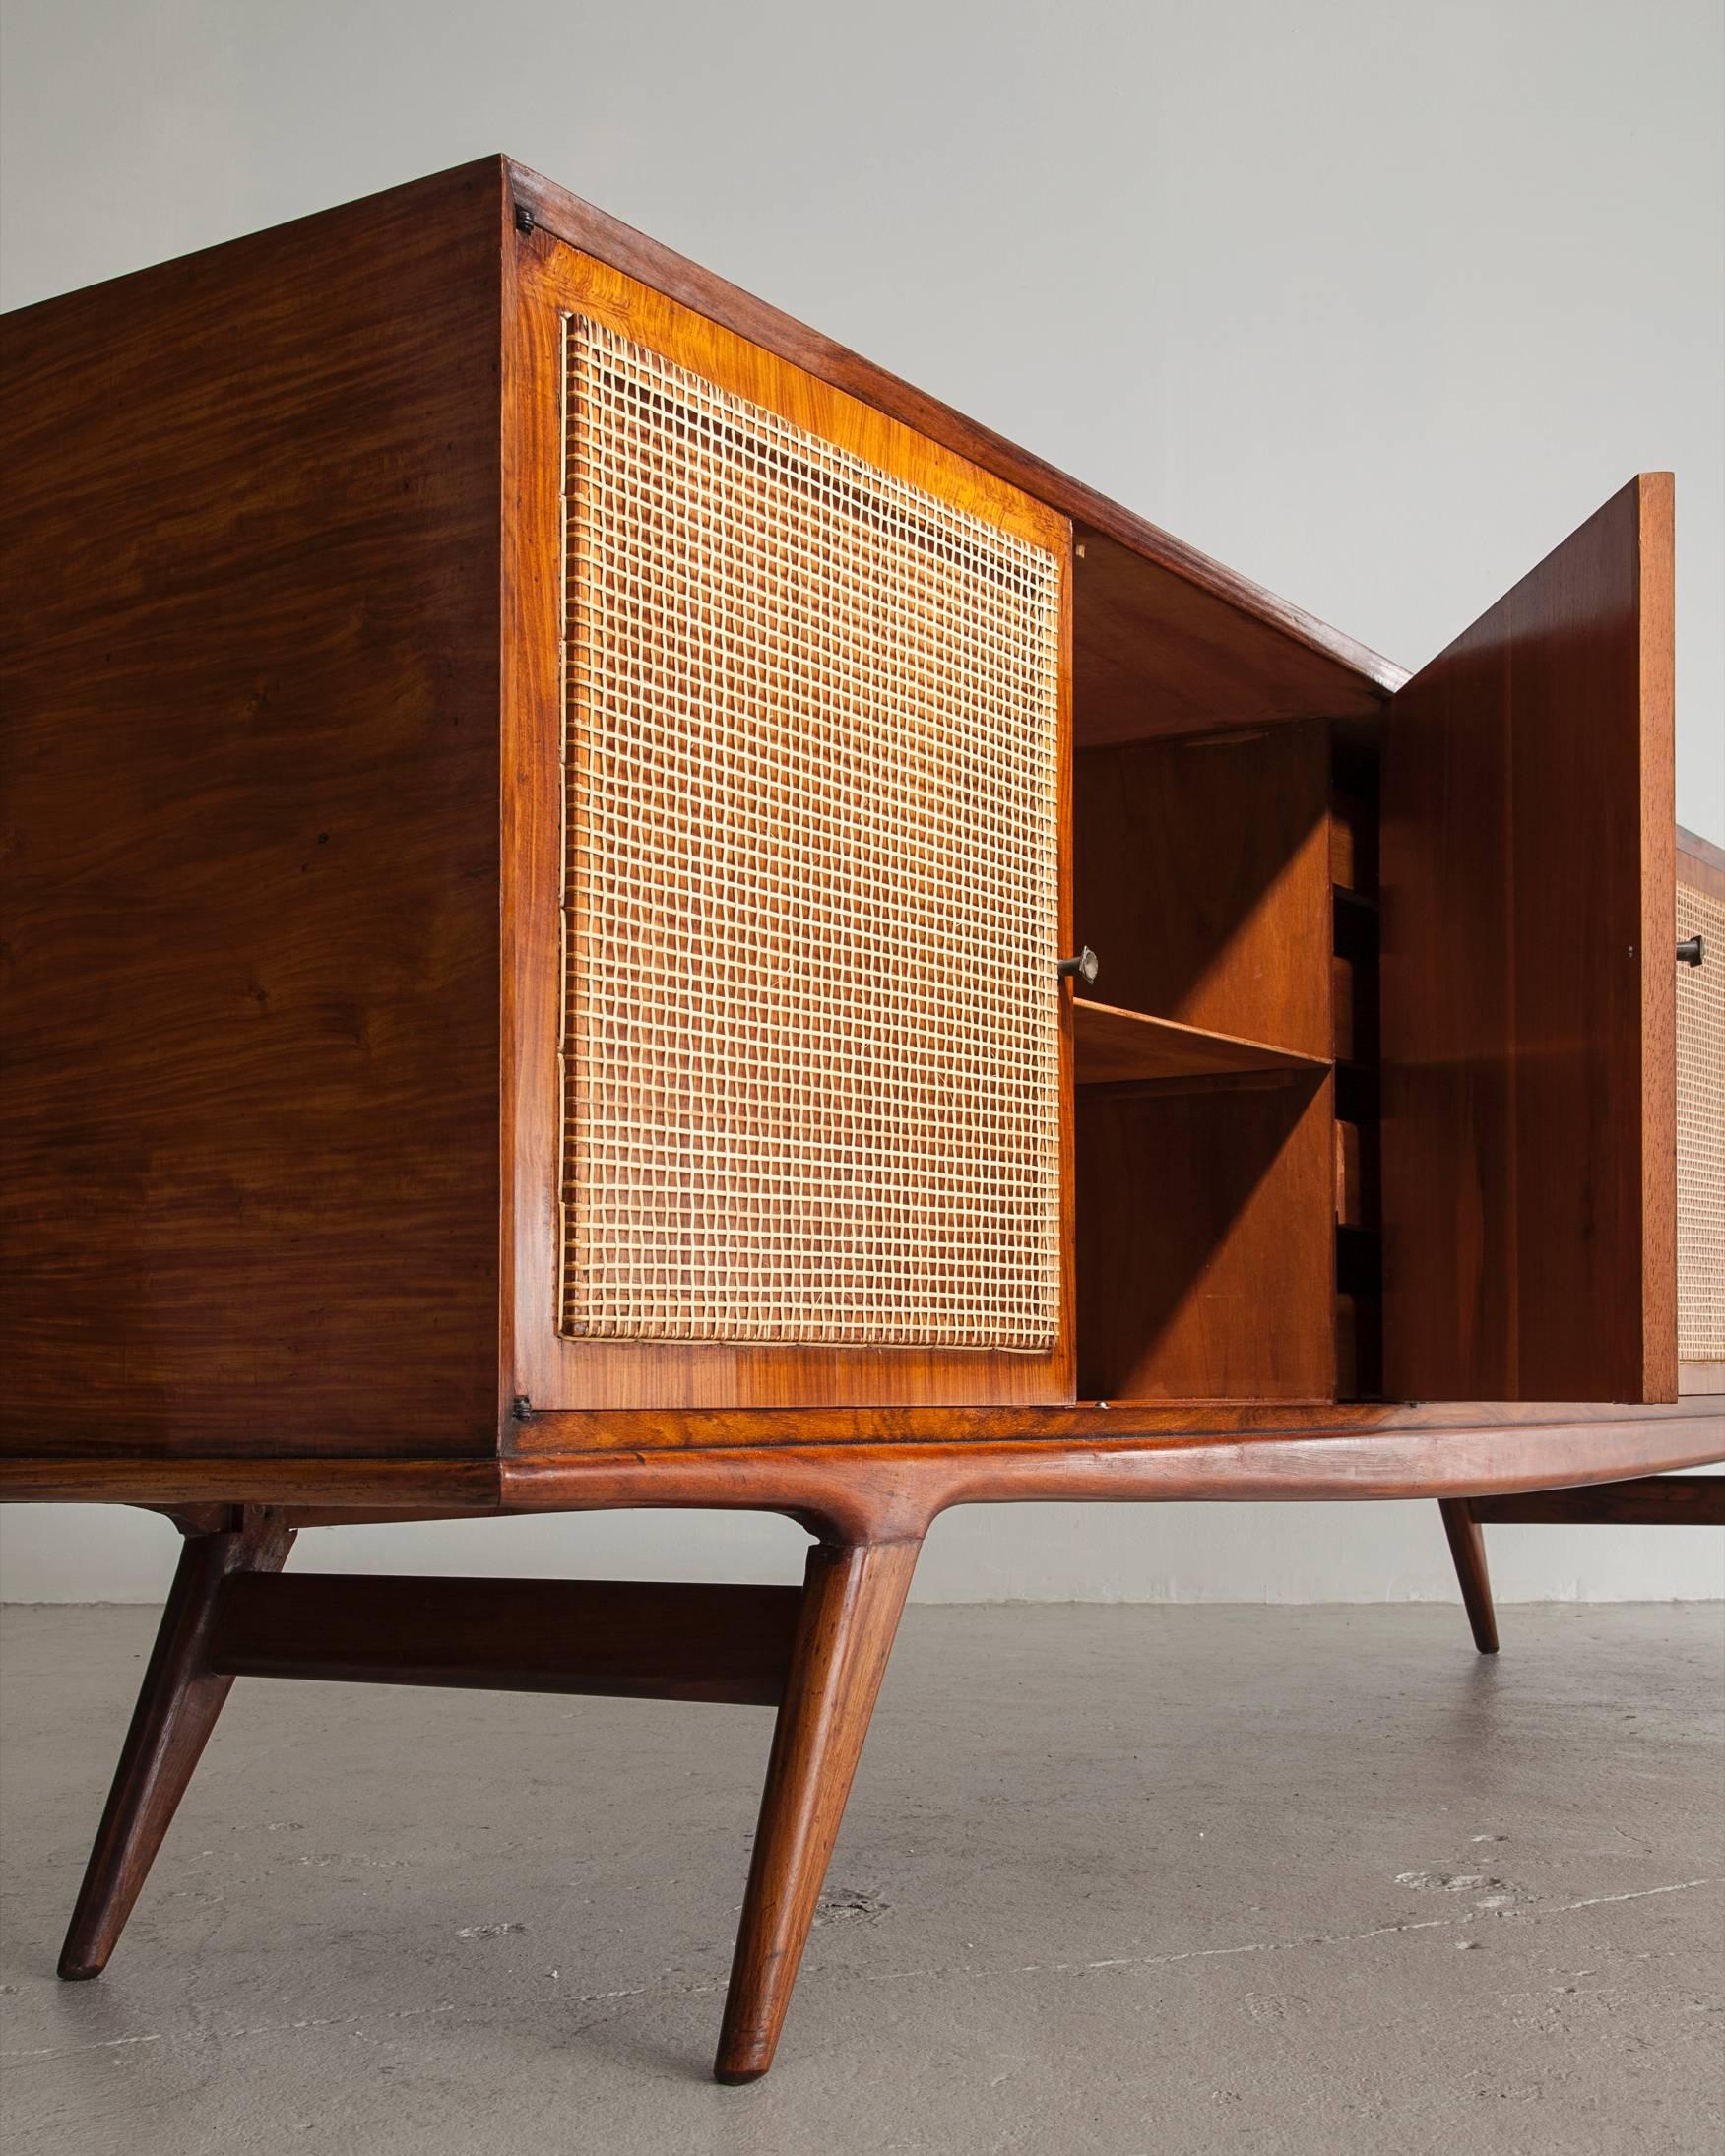 Credenza in caviona wood with a cane front. Designed by Martin Eisler for Forma, Brazil, 1950s.